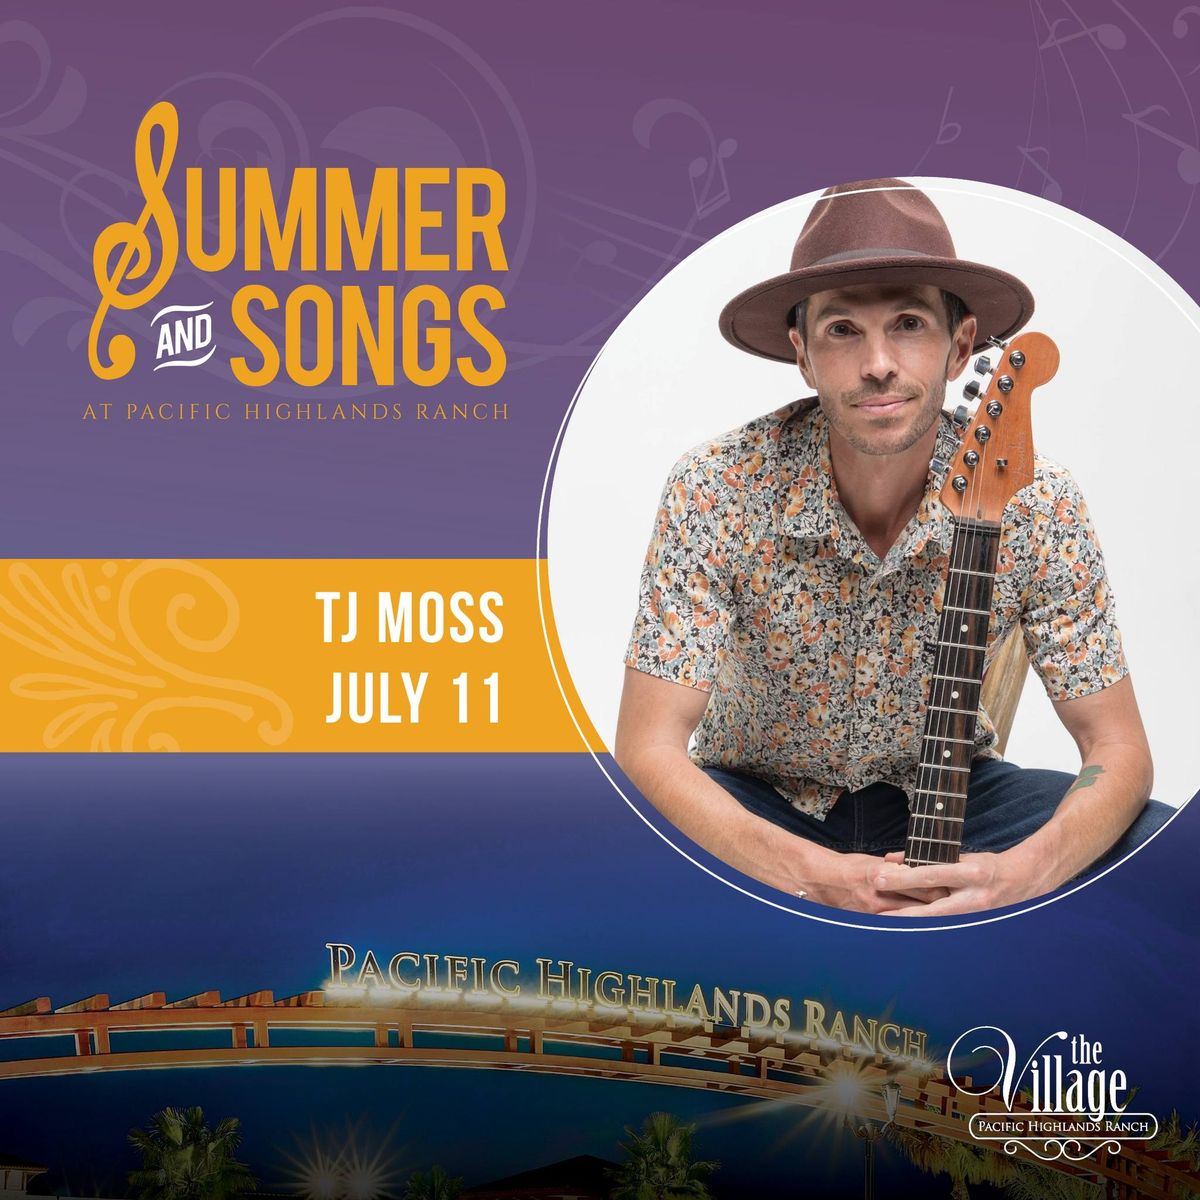 Summer and Songs - The Village at PHR - Live Music - TJ Moss